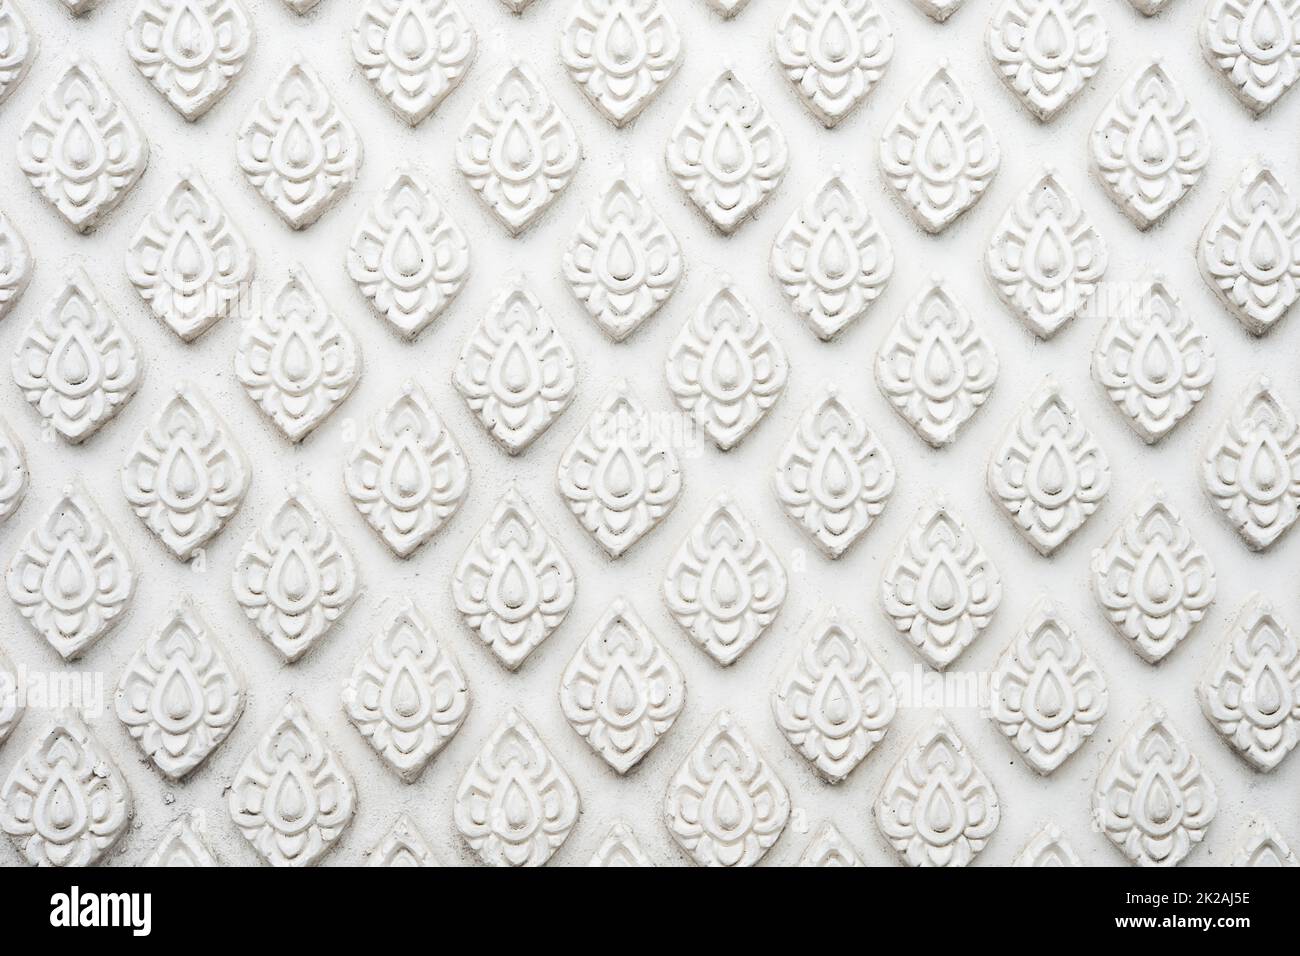 Damask seamless wall background, eastern pattern with ethnic mosaic texture Stock Photo